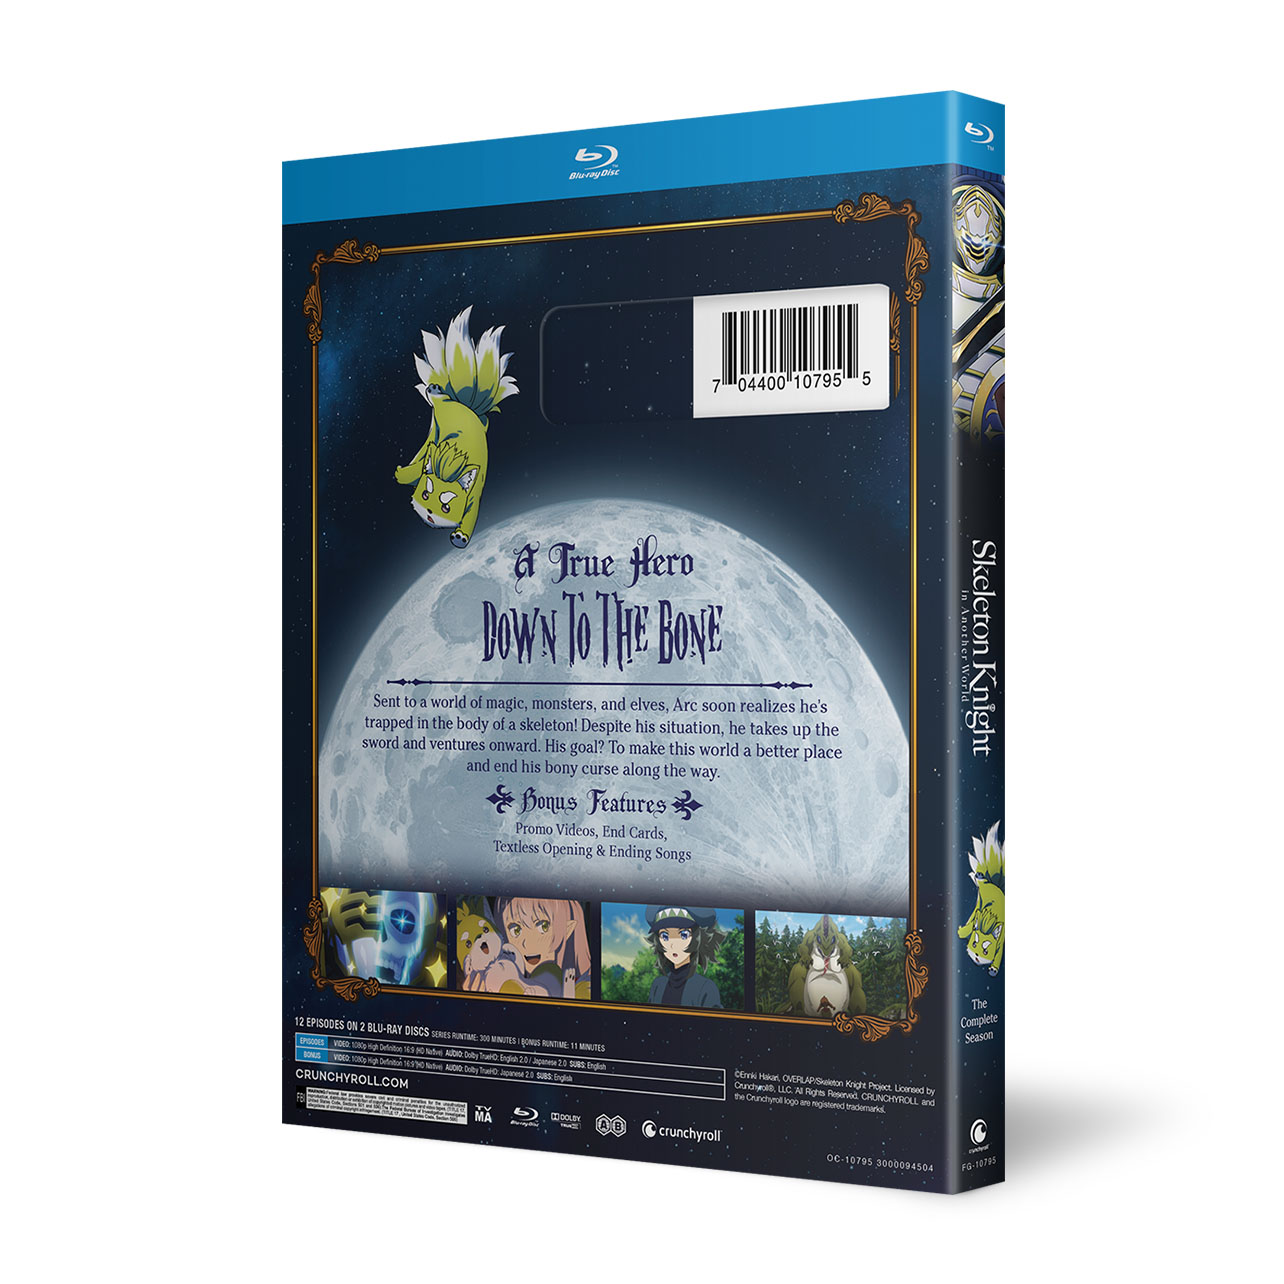 Skeleton Knight in Another World - The Complete Season - Blu-ray image count 3